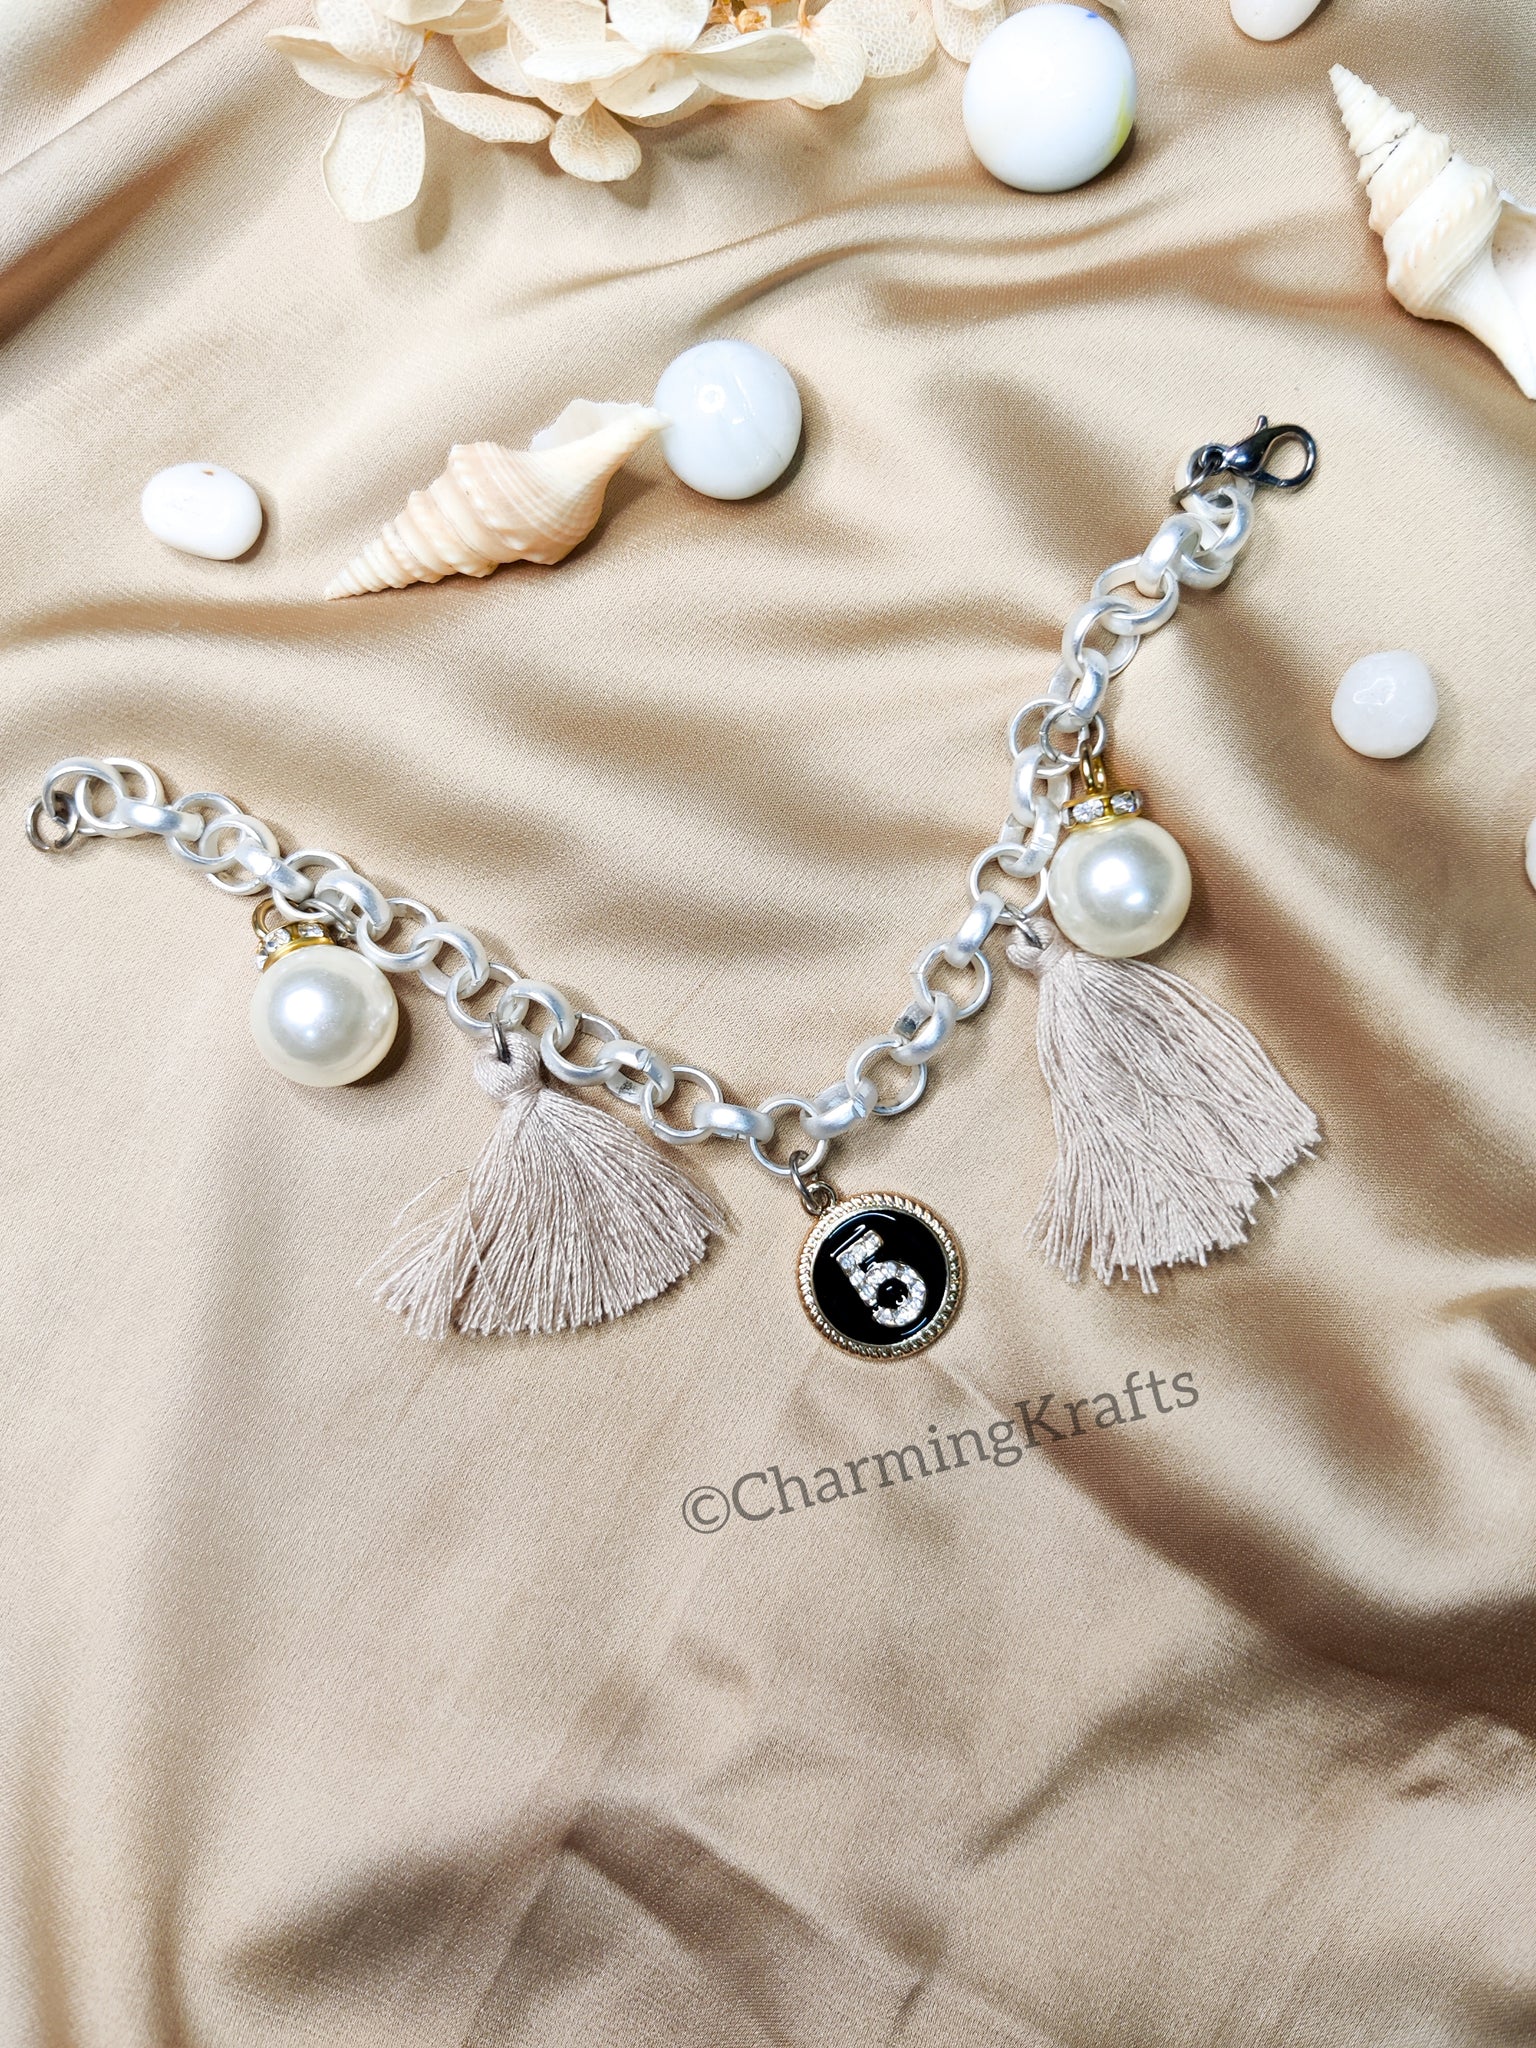 Silver with Beige Tassels and Charms Handcrafted Bracelet